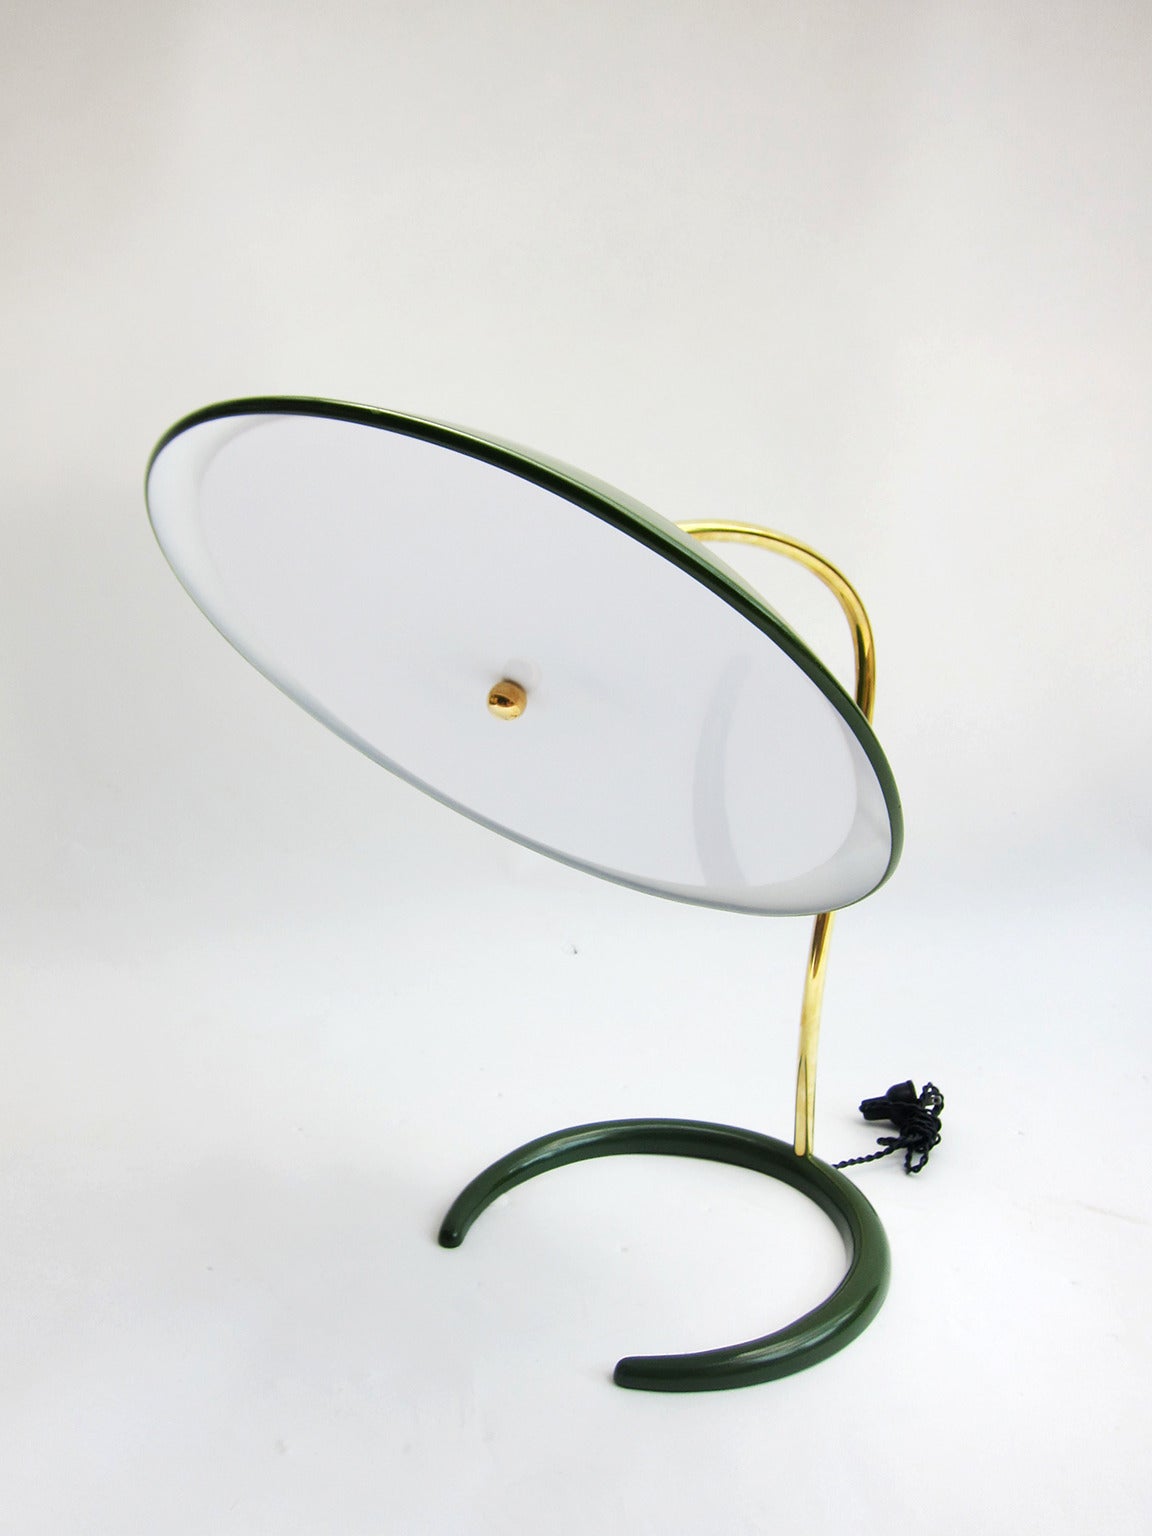 Circular (adjustable) dome over crescent base separated by a curved brass rod, this lamp by Gerald Thurston is a standout for its simple grace. As with all lighting designed by Thurston, who designed for Lightolier in the 50’s and 60’s, a